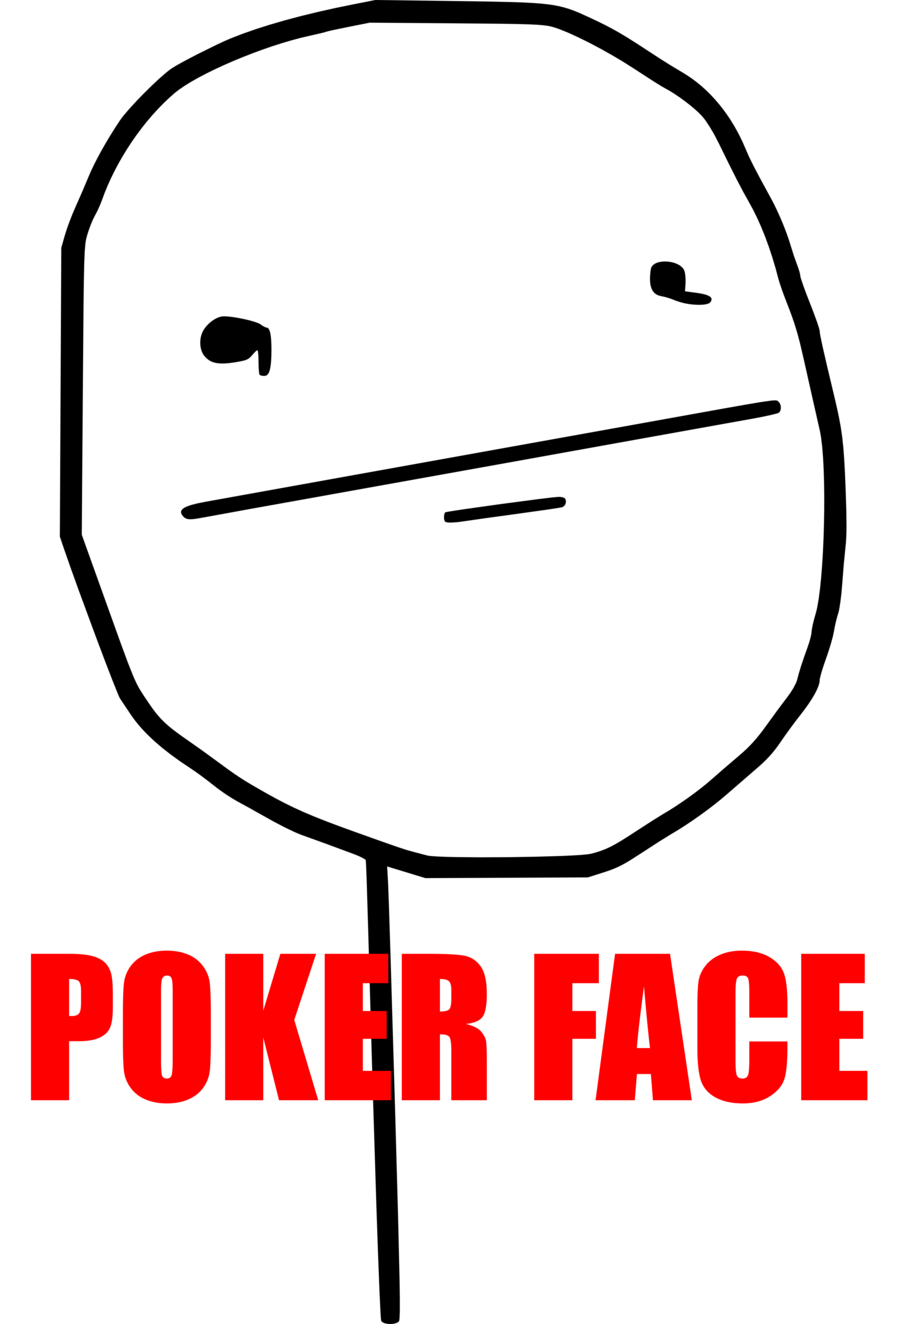 poker-face.png